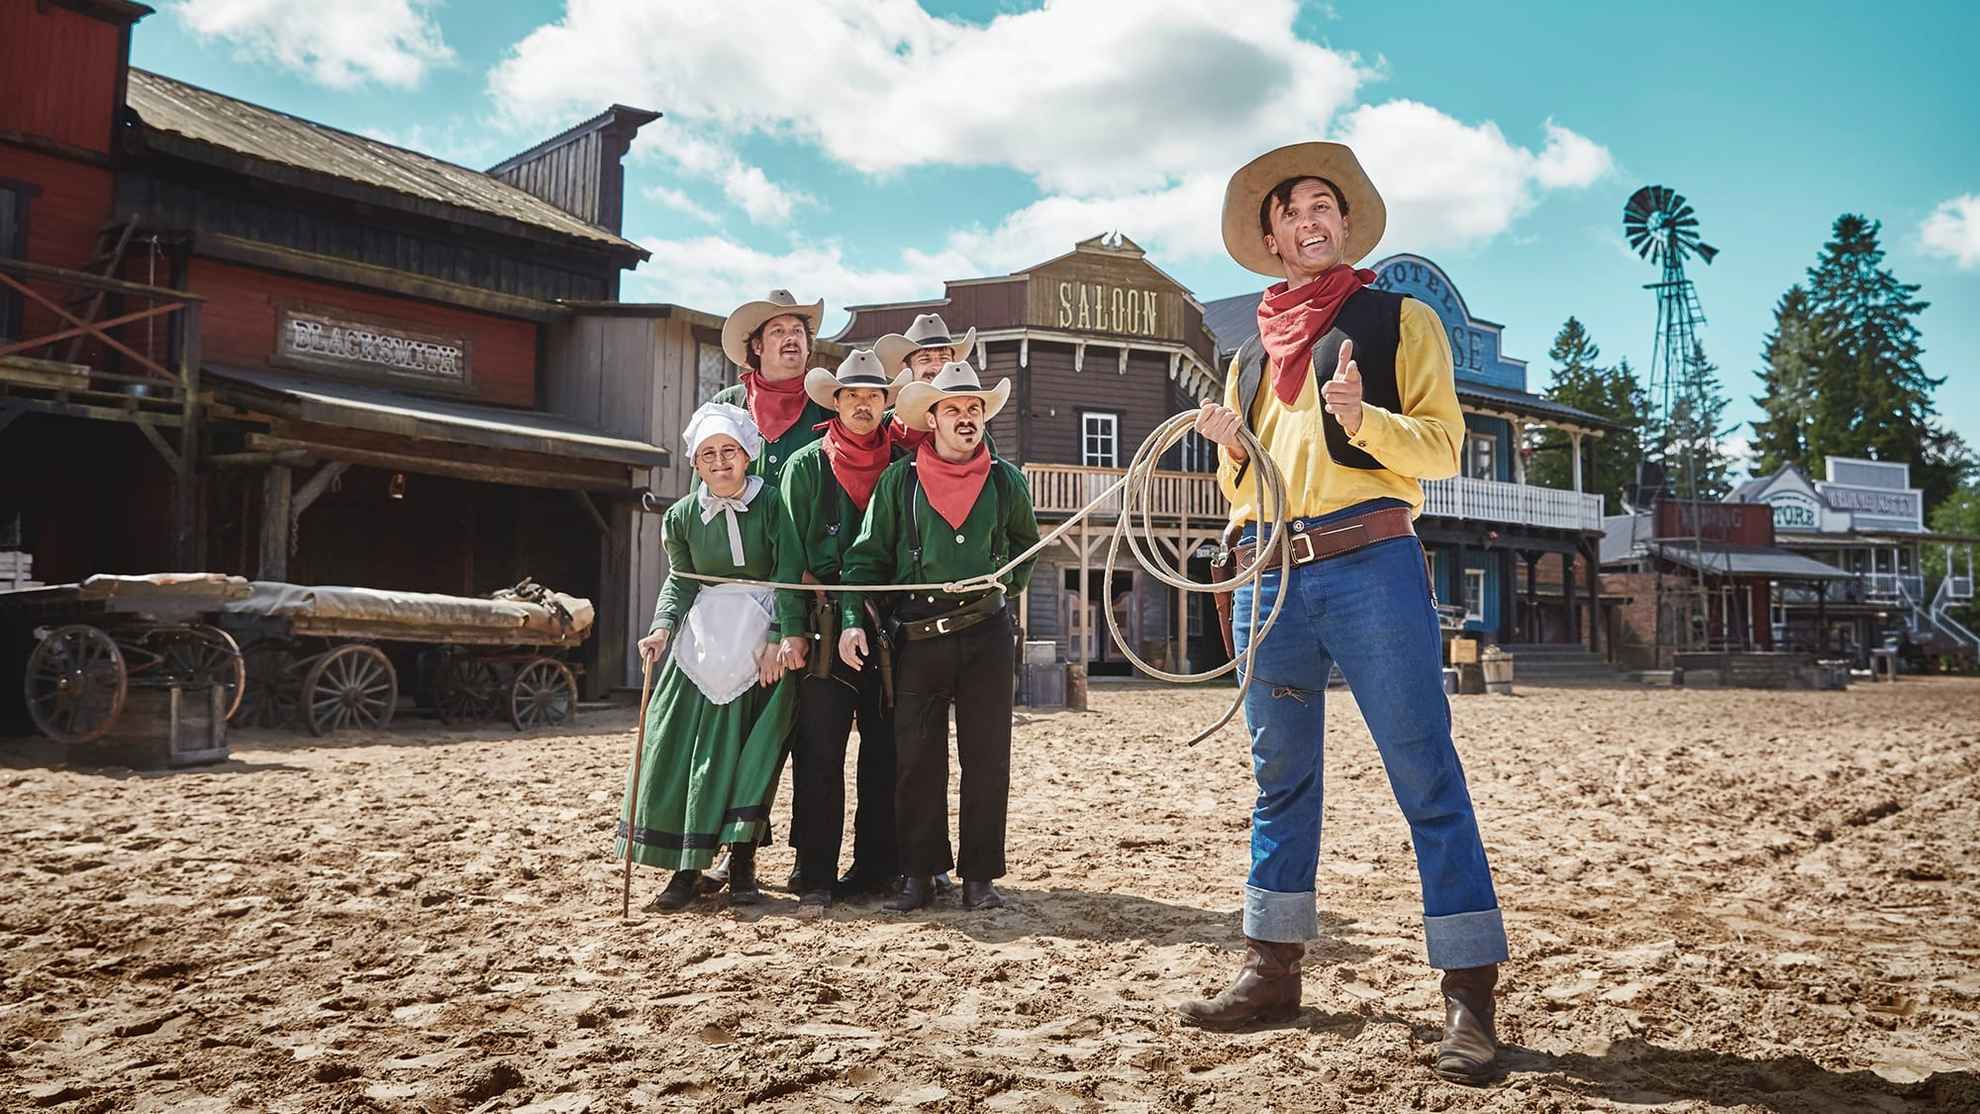 A man dressed as the character Lucky Luke has a lasso around a group of other costumed characters at High Chaparral in Småland.